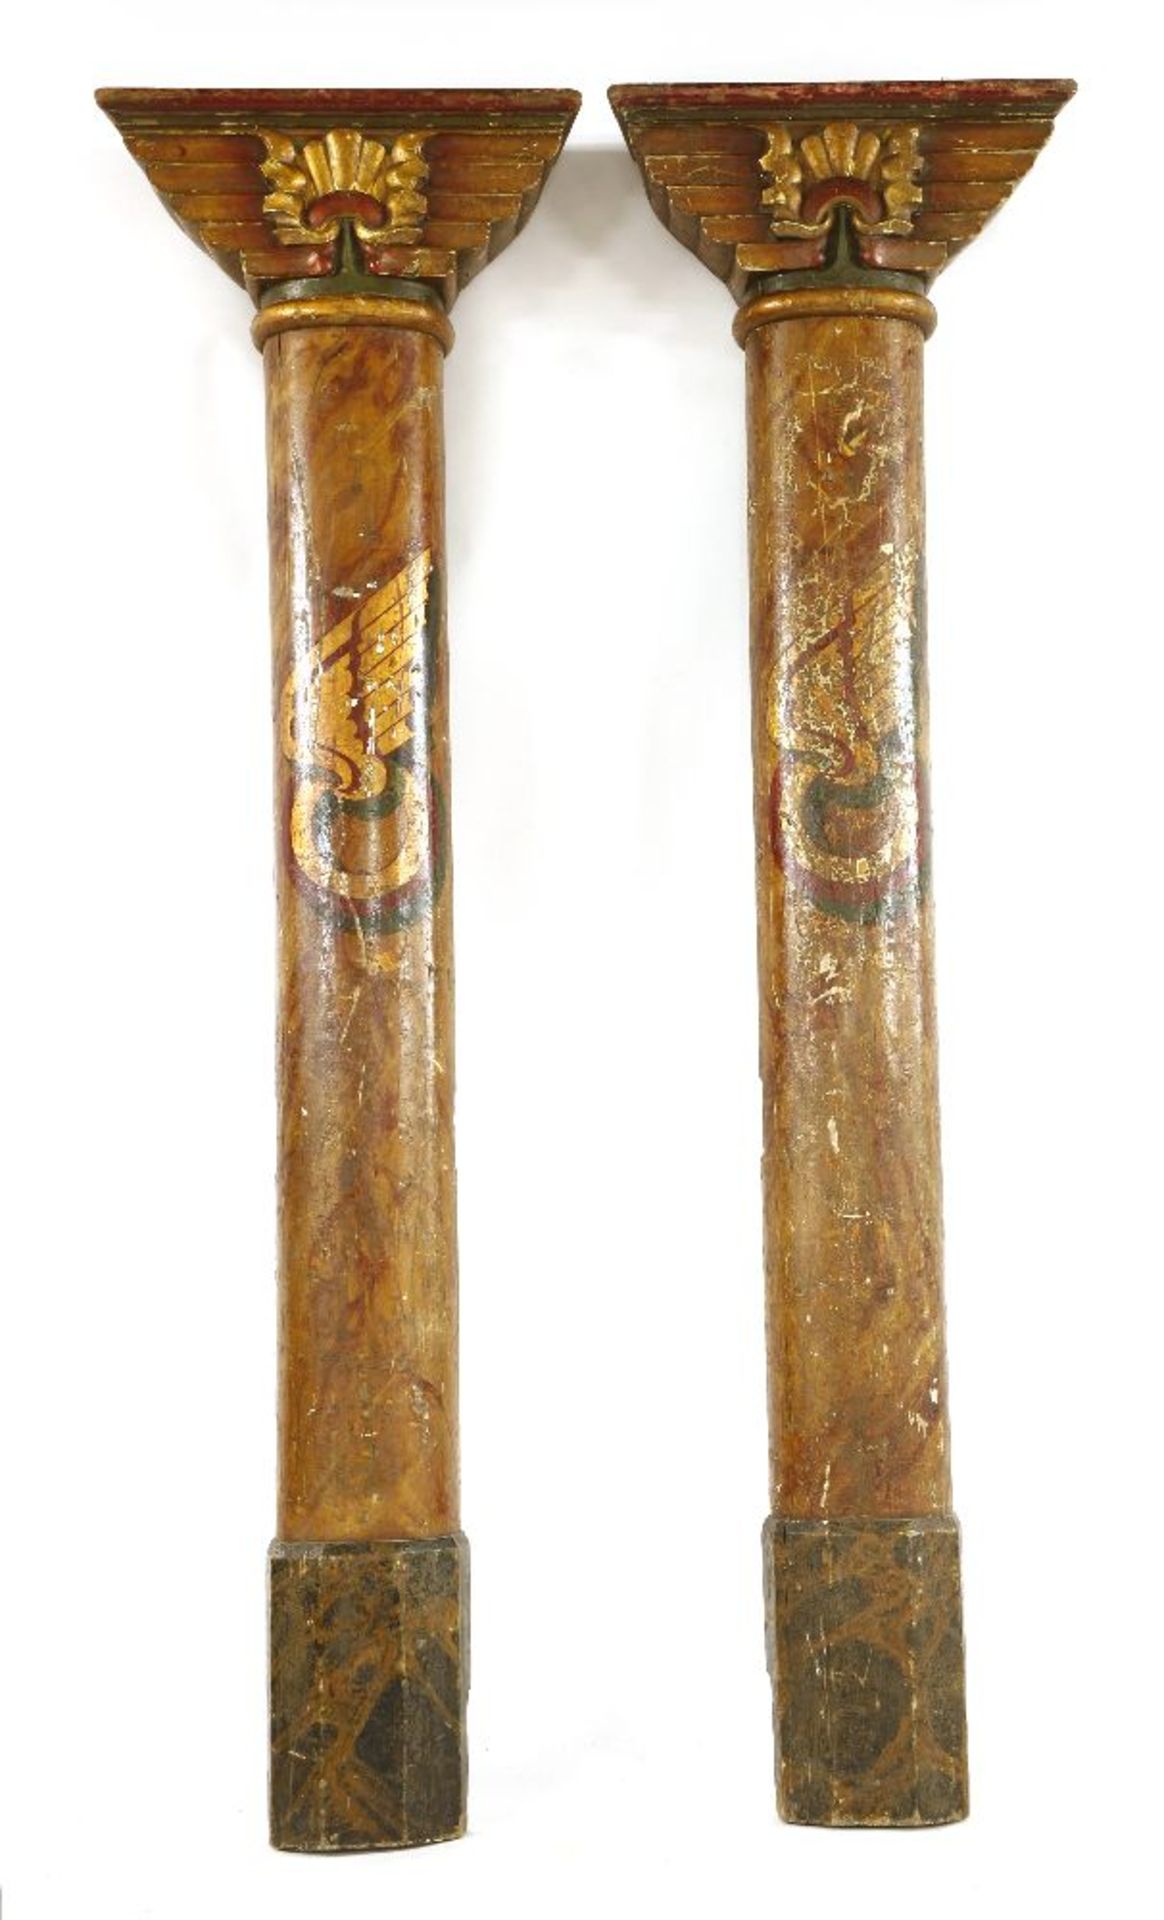 A PAIR OF EGYPTIAN-STYLE ART DECO FAIRGROUND PILLARS,c.1936, British, the carved wooden capitals